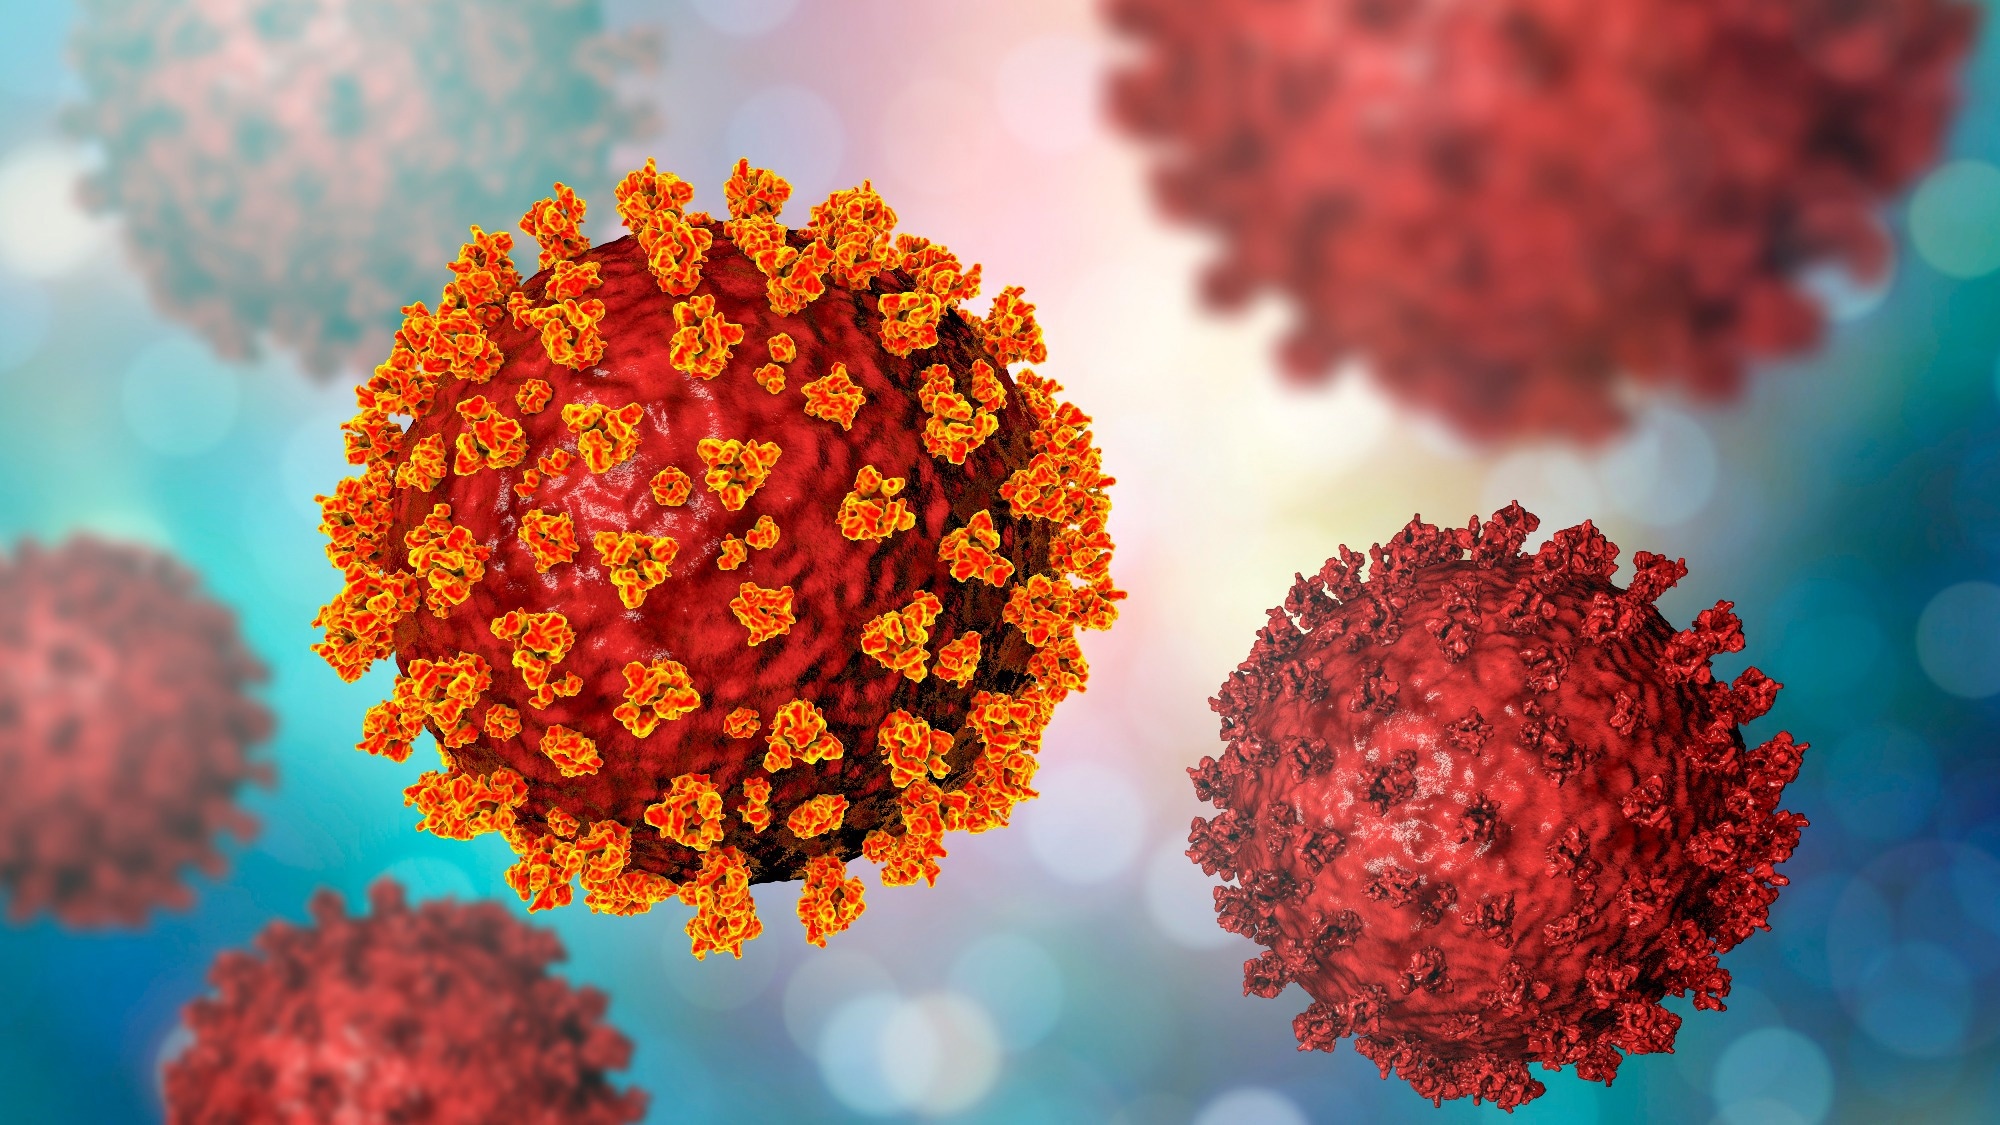 Depiction of the SARS-CoV-2 virus